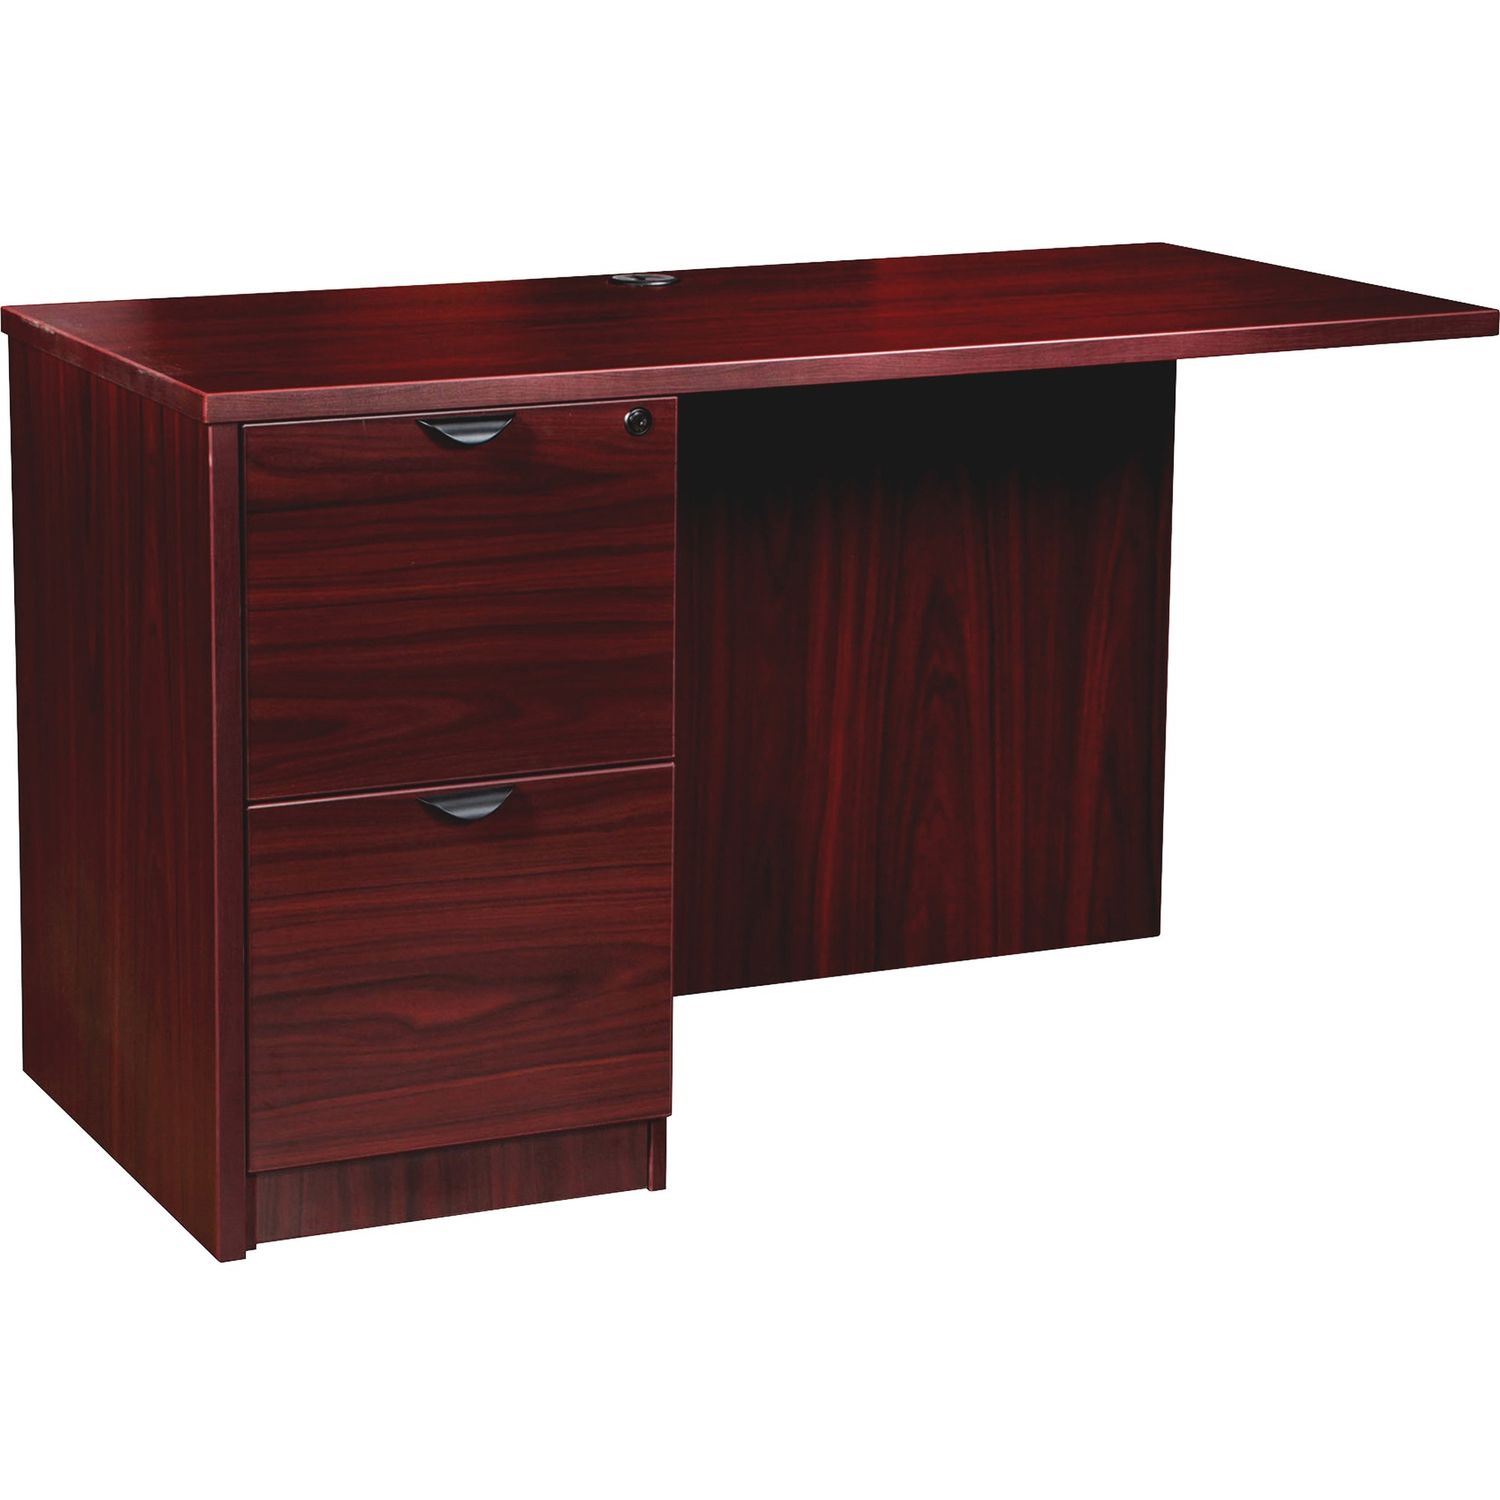 Prominence 2.0 Mahogany Laminate Left Return - 2-Drawer 48" x 24" x 29" , 1" Top, 2 x File Drawer(s), Band Edge, Material: Particleboard, Finish: Mahogany Laminate, Thermofused Melamine (TFM)